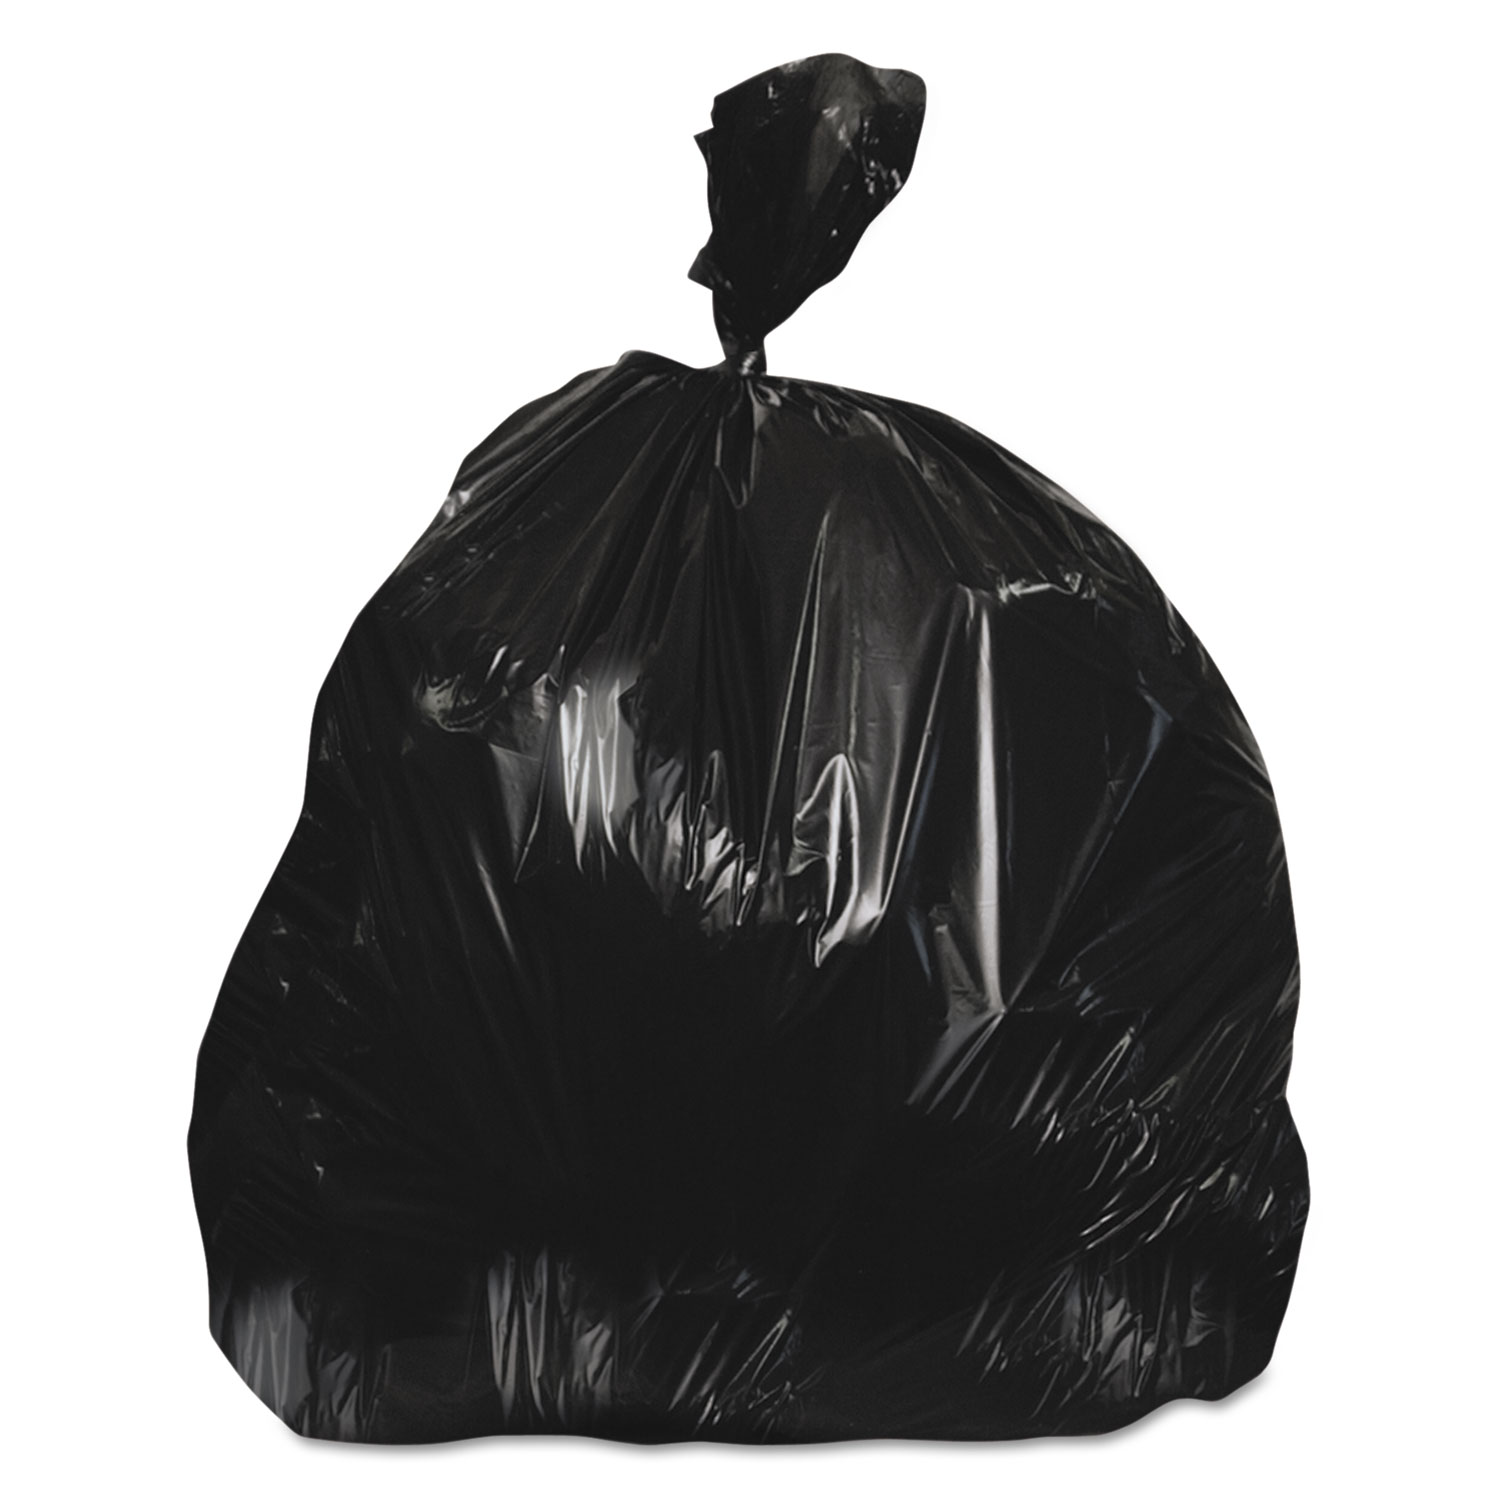 AMZ Supply Black Polyethylene Trash Bags 33x40 33 Gallon Garbage Can Liners  11 Micron Pack of 500 